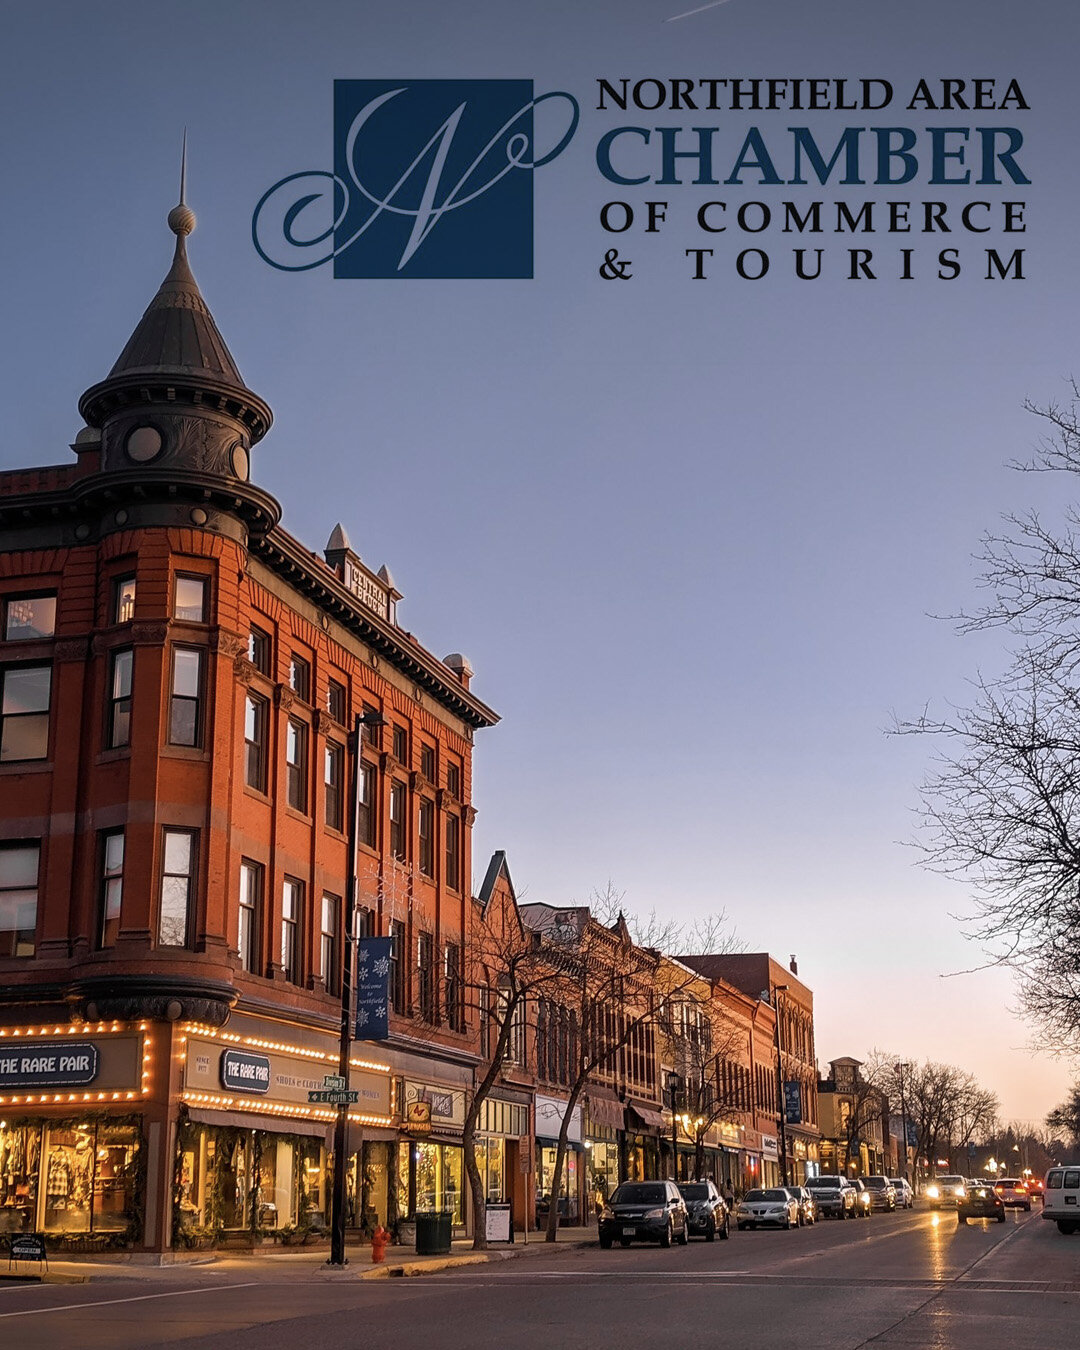 We are now proud members of the Northfield Chamber of Commerce! Looking forward to diving in and getting involved in this amazing community and the place we call home!